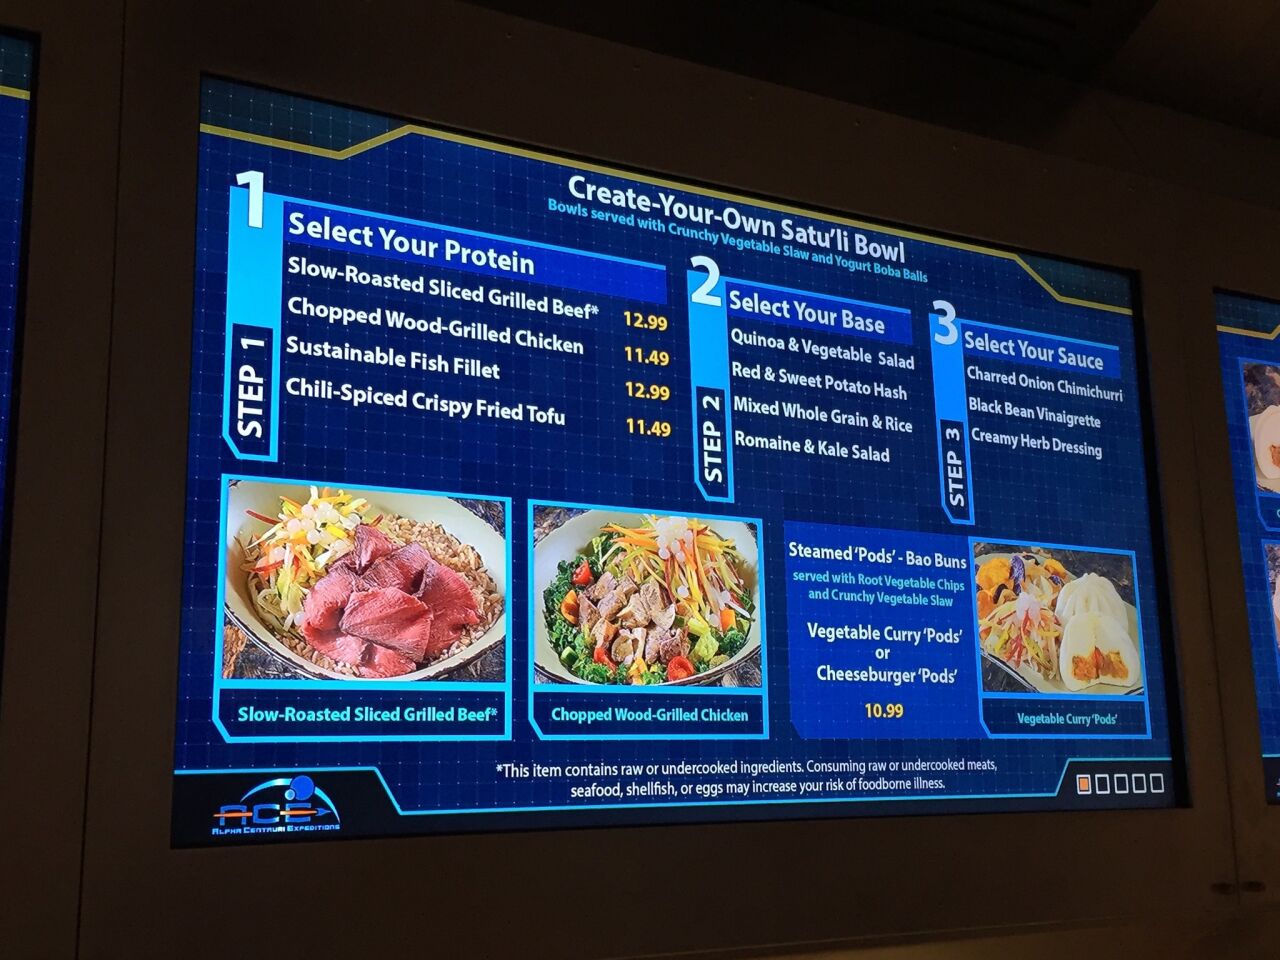 Ordering from The "Avatar"-inspired menu is as easy as 1-2-3.